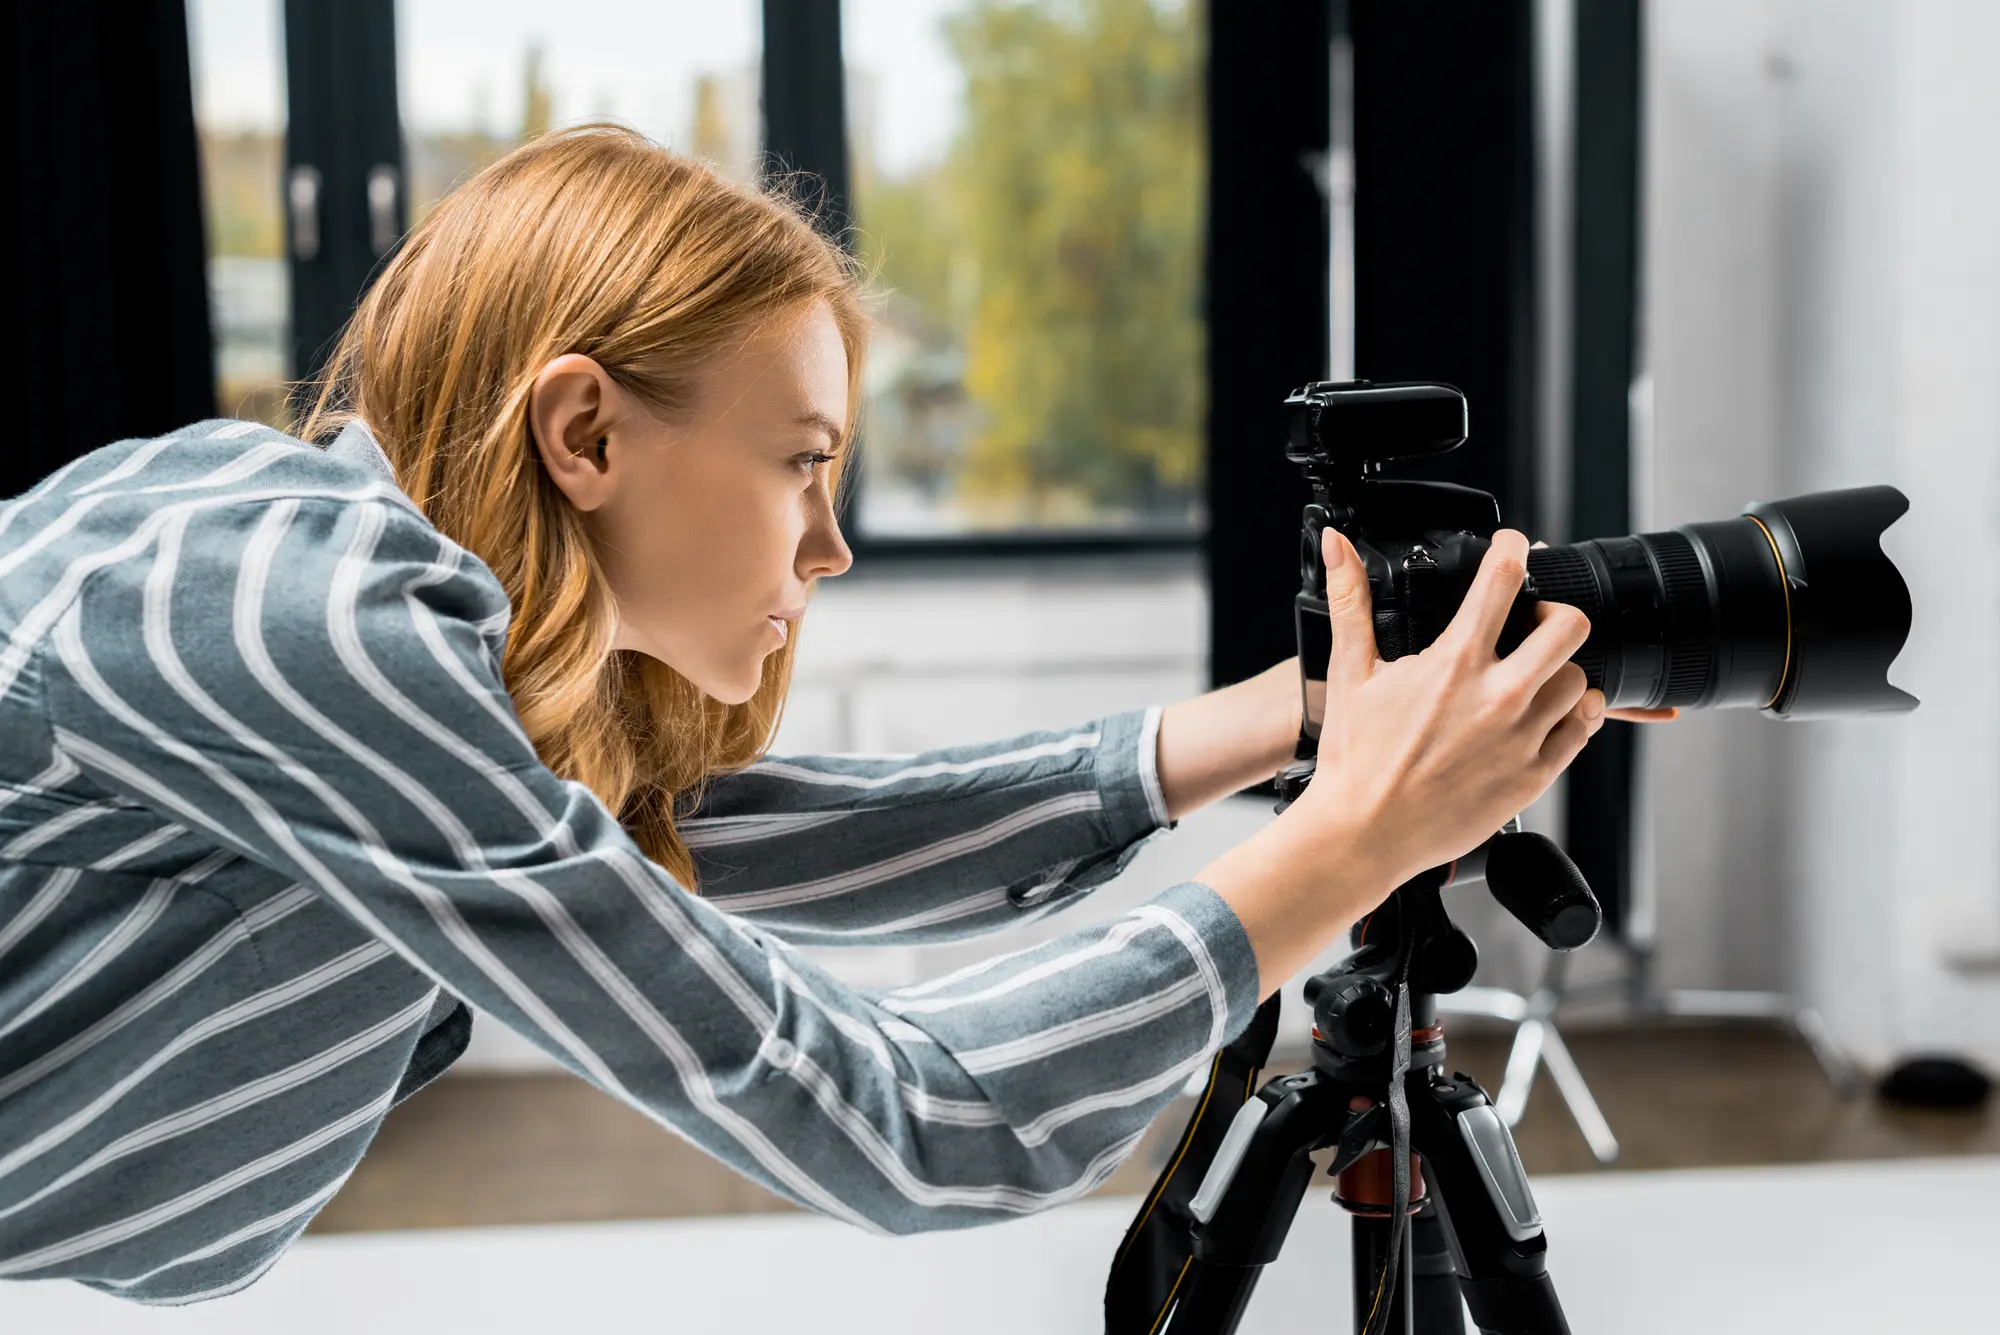 woman taking a photo with a professional camera on a tripod